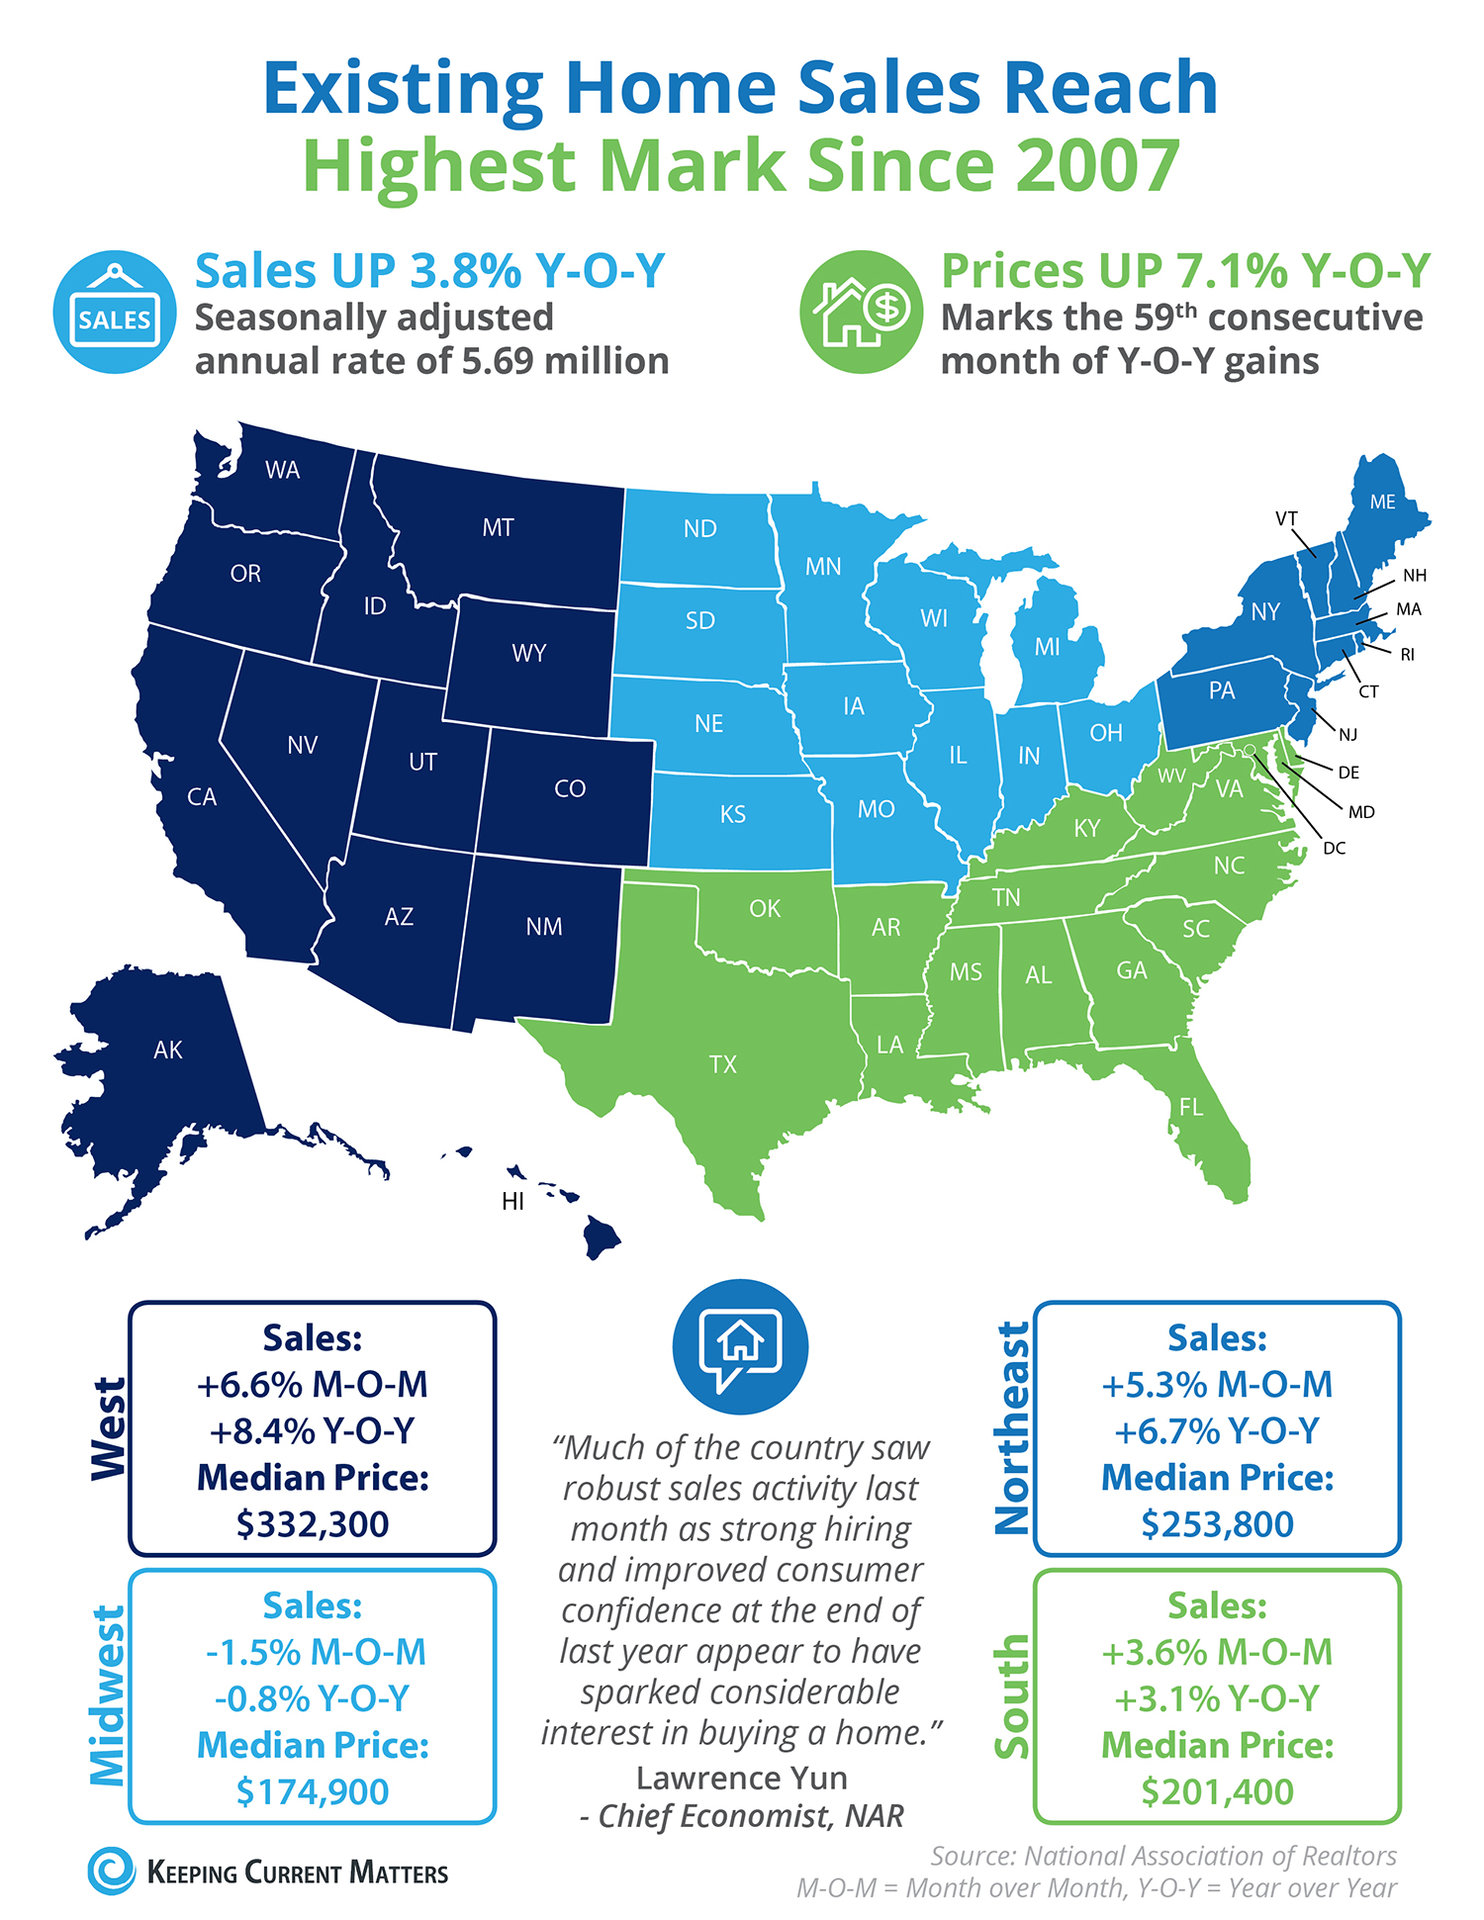 Existing Home Sales Reach Highest Mark Since 2007 [INFOGRAPHIC] | Keeping Current Matters